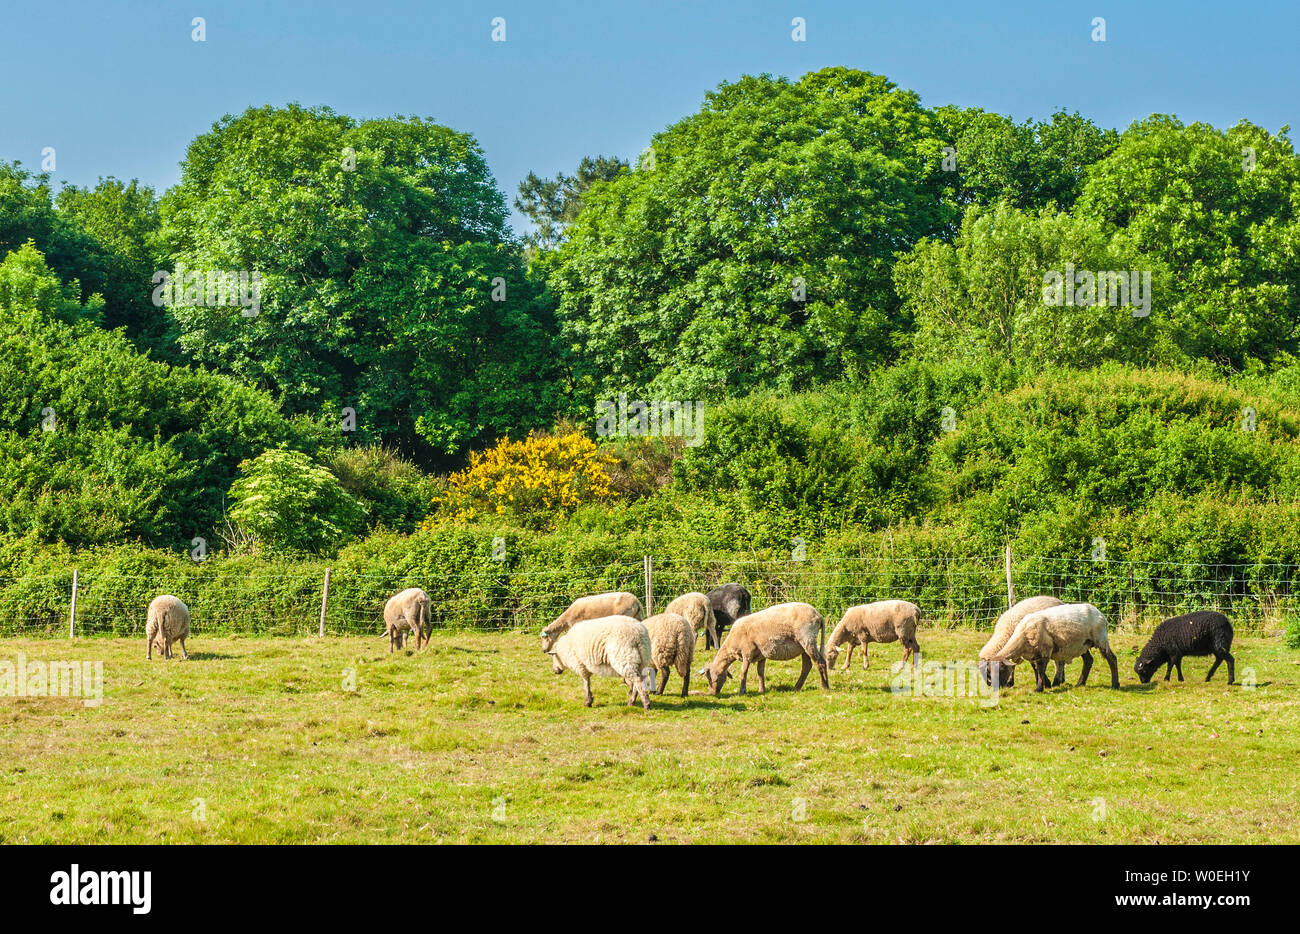 France, Brittany, Finistere, Moelan sur Mer, a flock of sheep Stock Photo